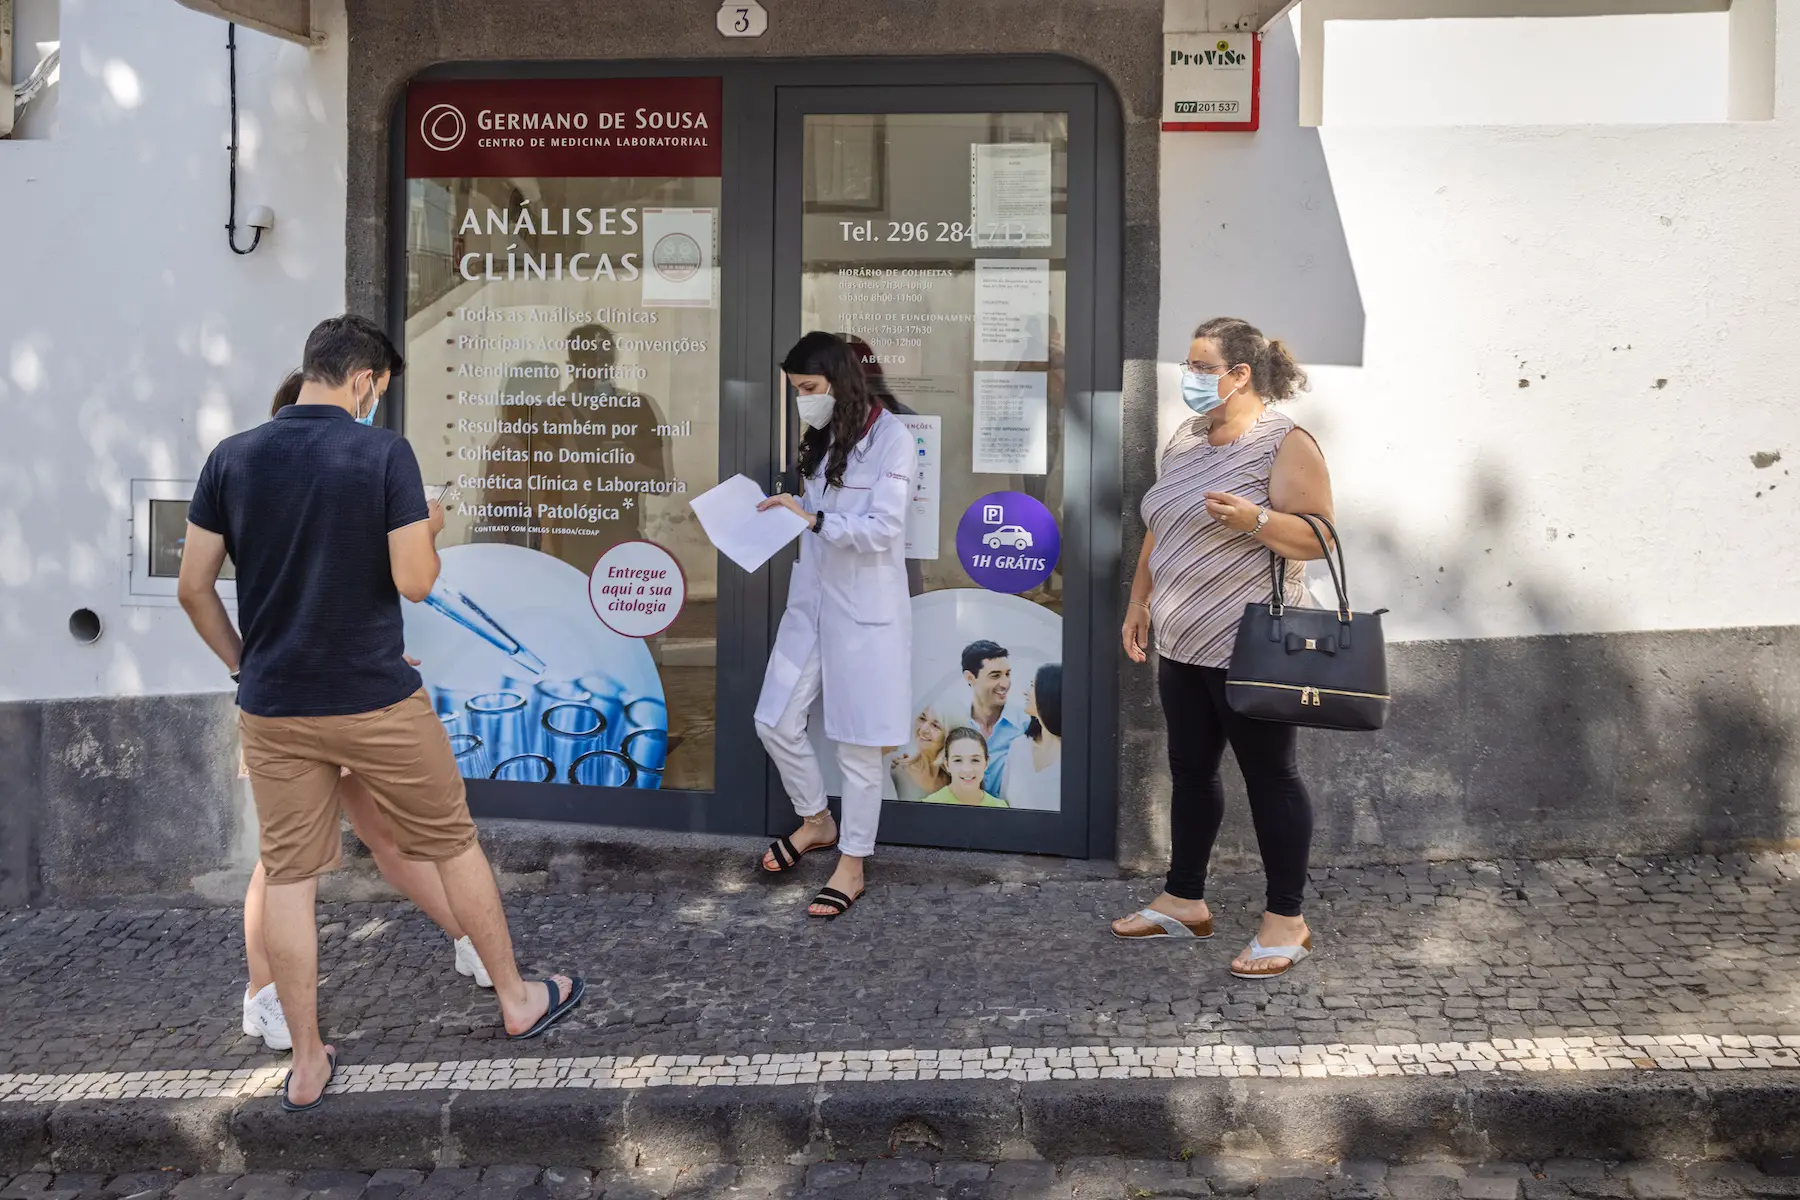 People stand on the sidewalk outside a medical clinic during the COVID-19 pandemic in the center of Ponta Delgada, Portugal